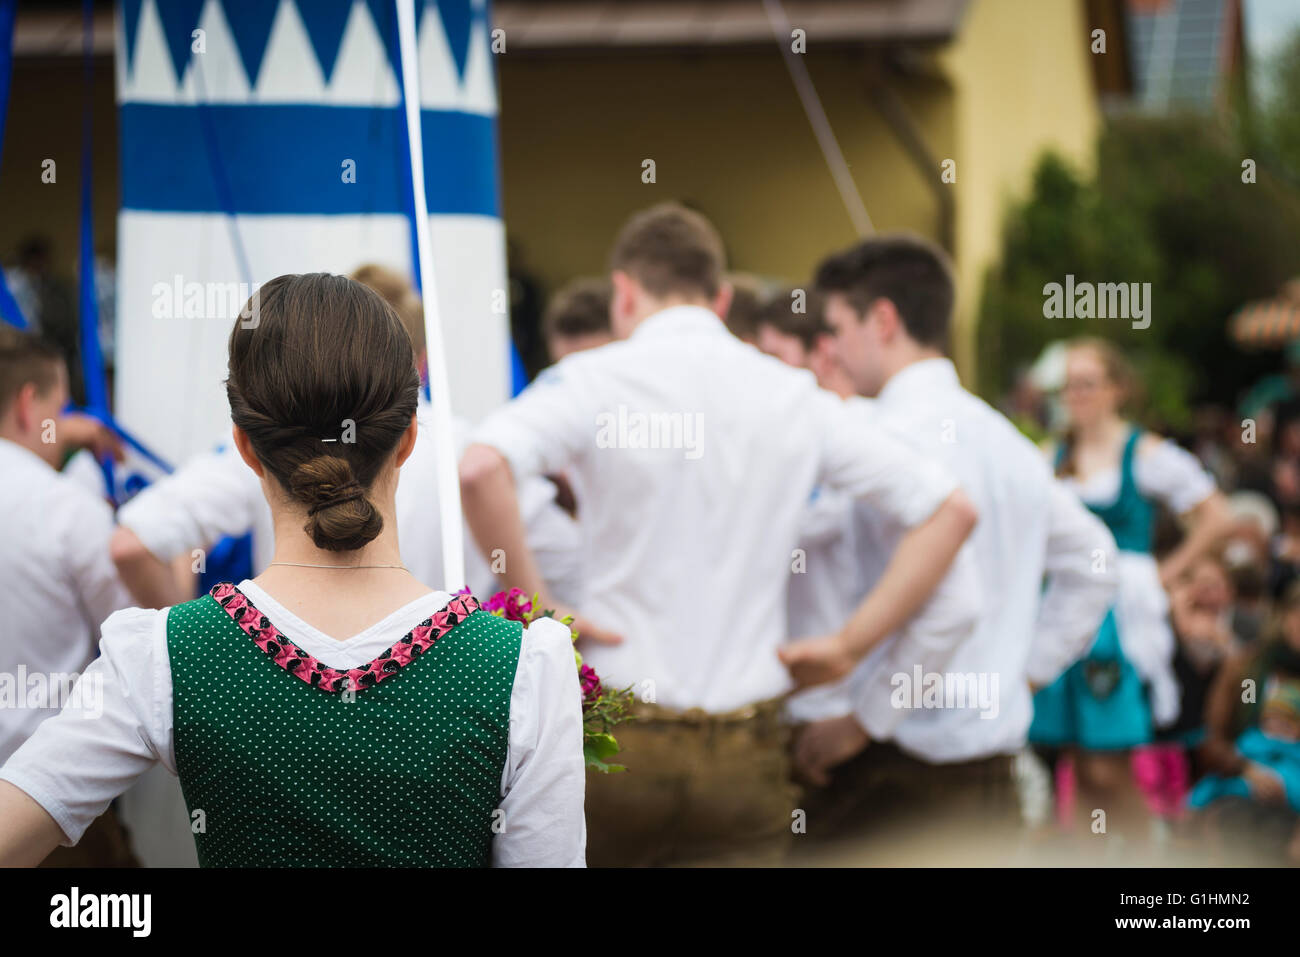 Woman in local dress watching young men in Lederhose standing around a maypole while dancing a traditional Bavarian folk dance Stock Photo